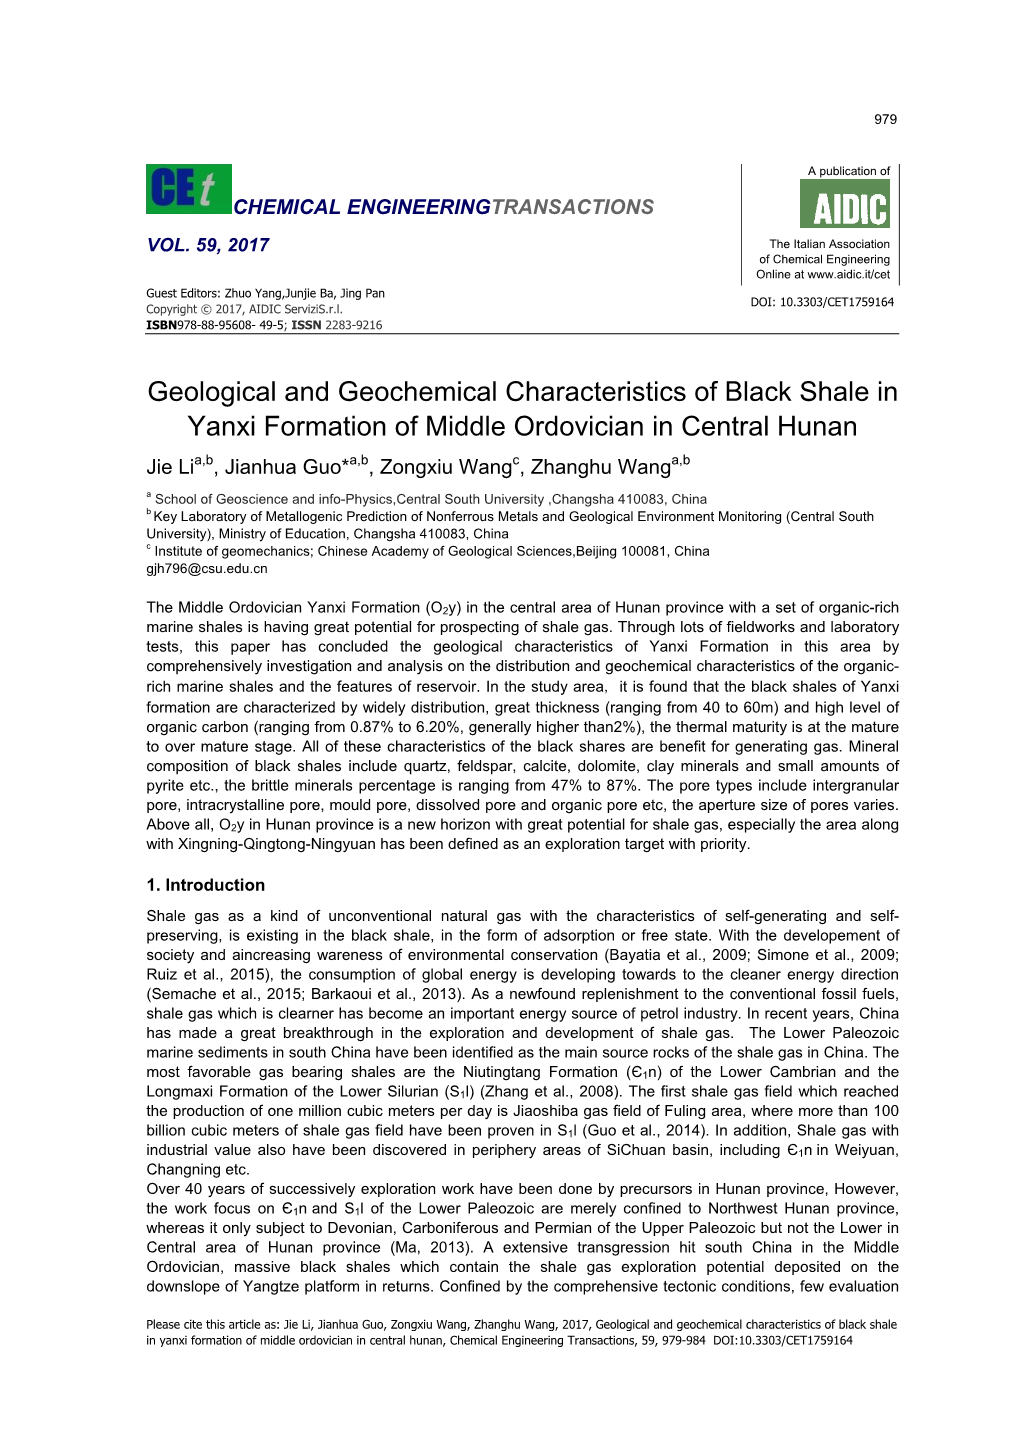 Geological and Geochemical Characteristics of Black Shale in Yanxi Formation of Middle Ordovician in Central Hunan